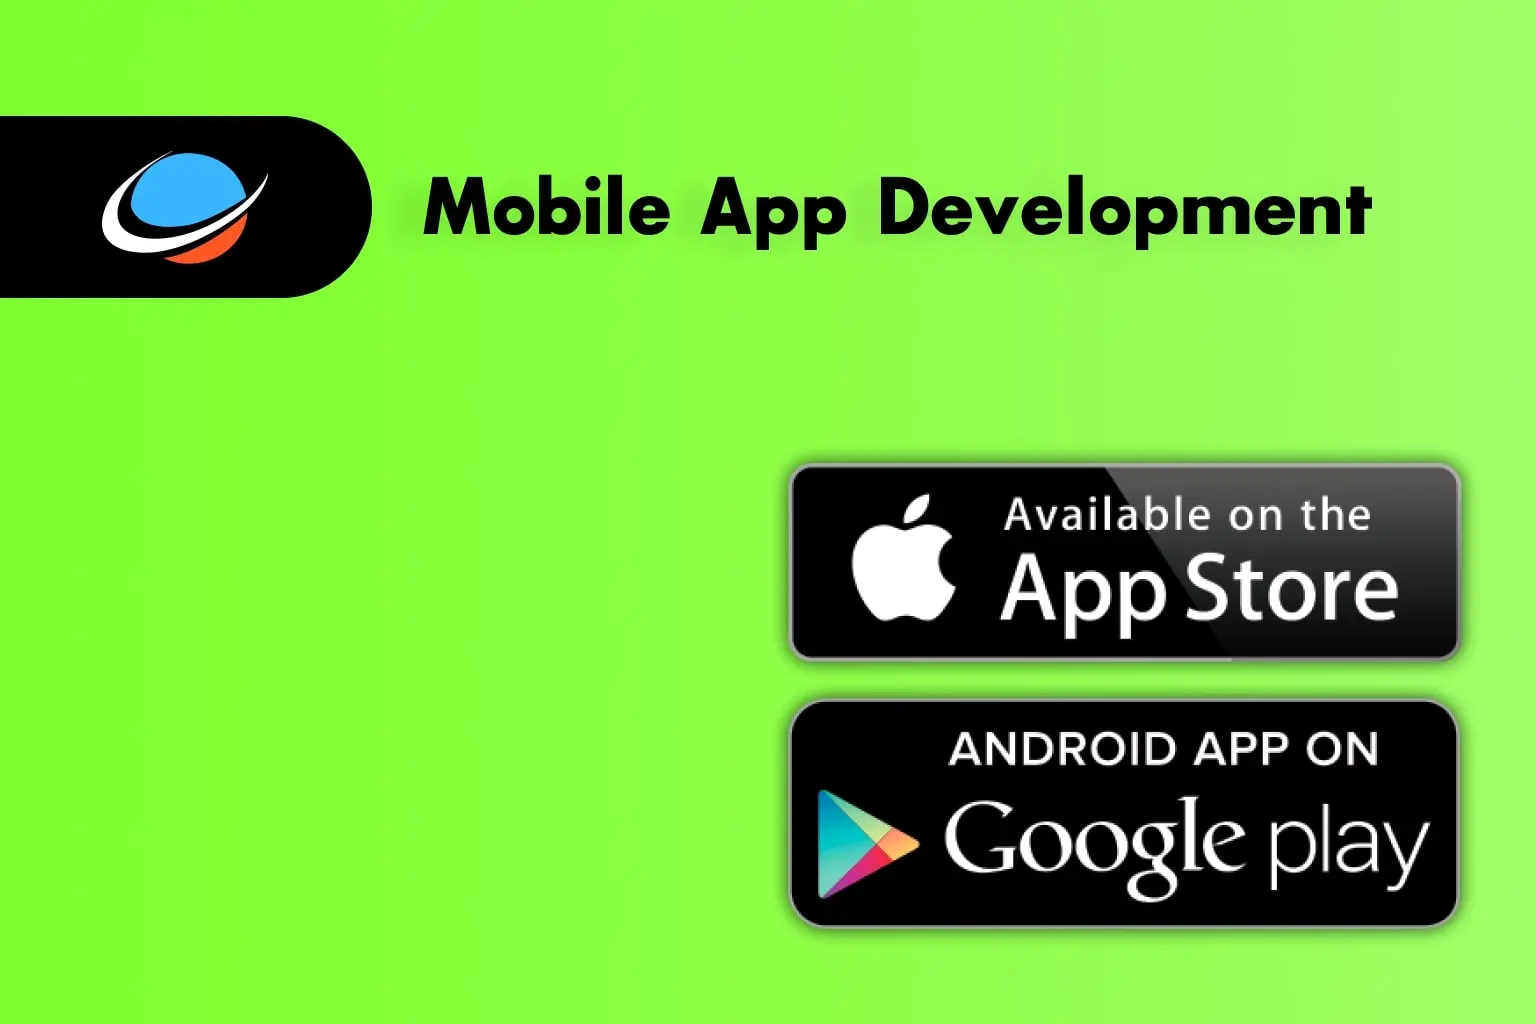 Mobile App Development. Harnessing 7+ years of expertise, we specialize in creating dynamic mobile applications. Our adept team ensures your app stands out, offering innovative solutions that captivate users. Join us for an unparalleled experience!